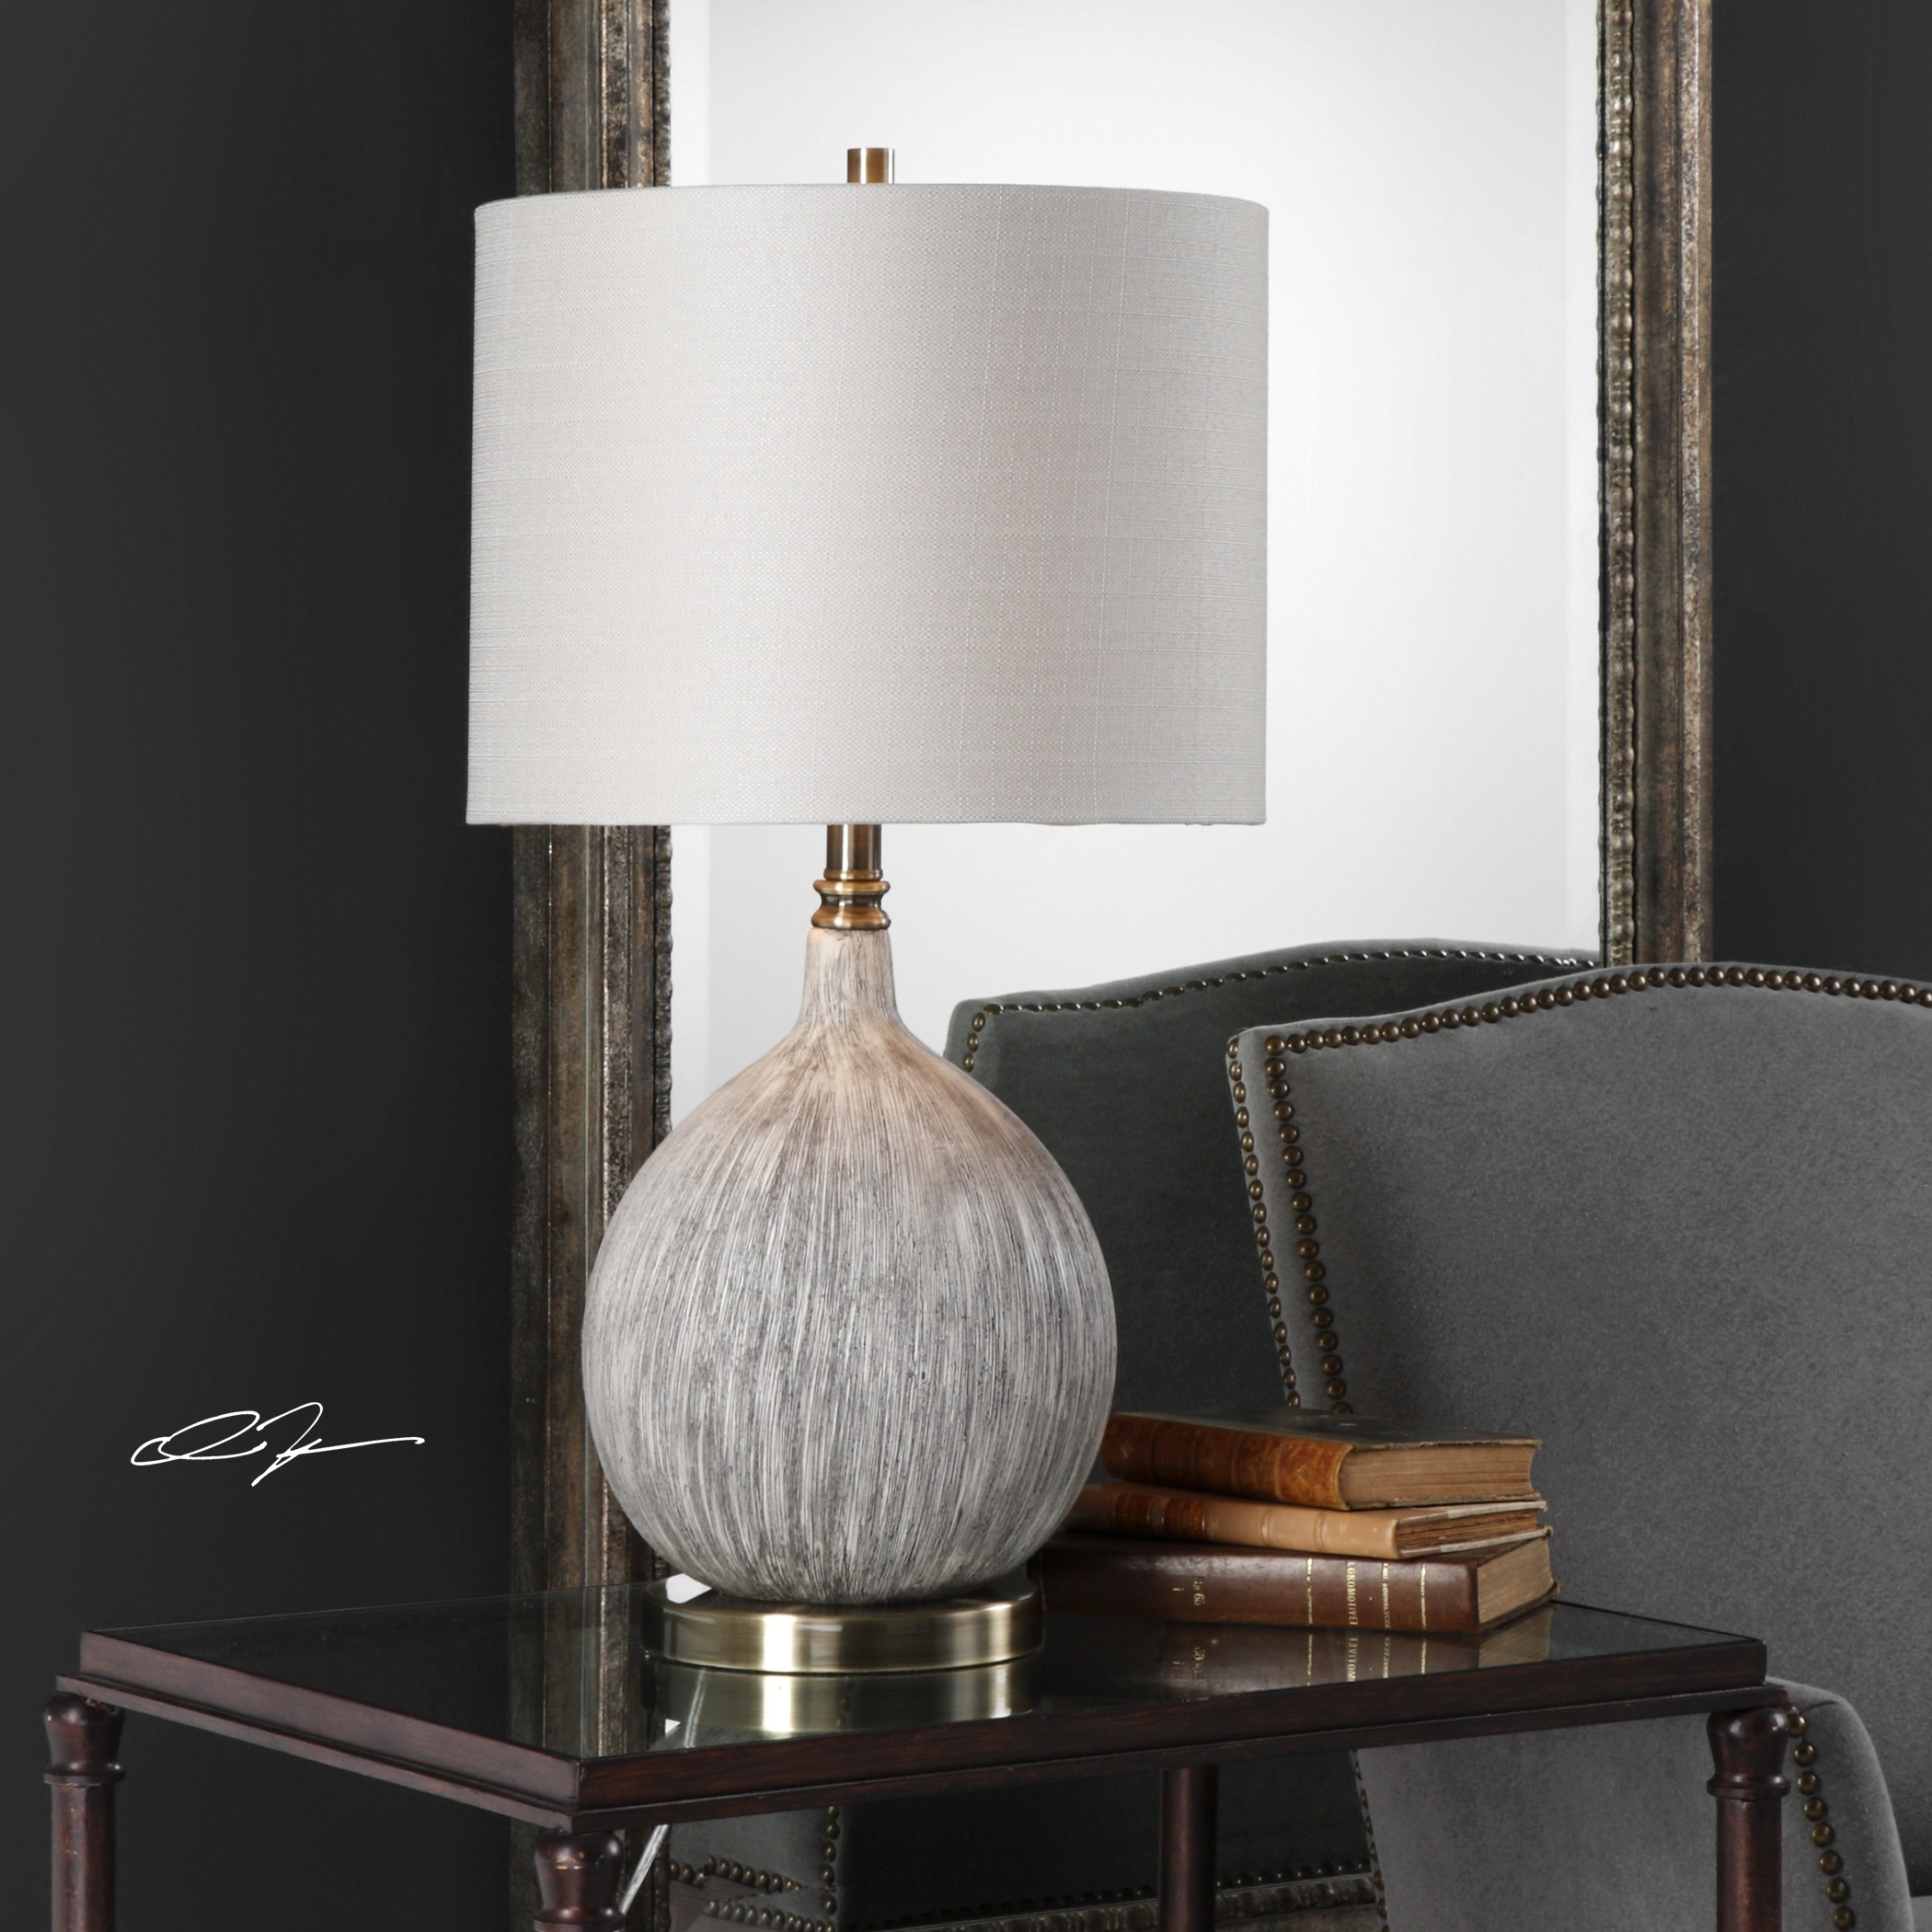 Hedera Textured Ivory Table Lamp, 14" x 14" x 26.5" - Image 3